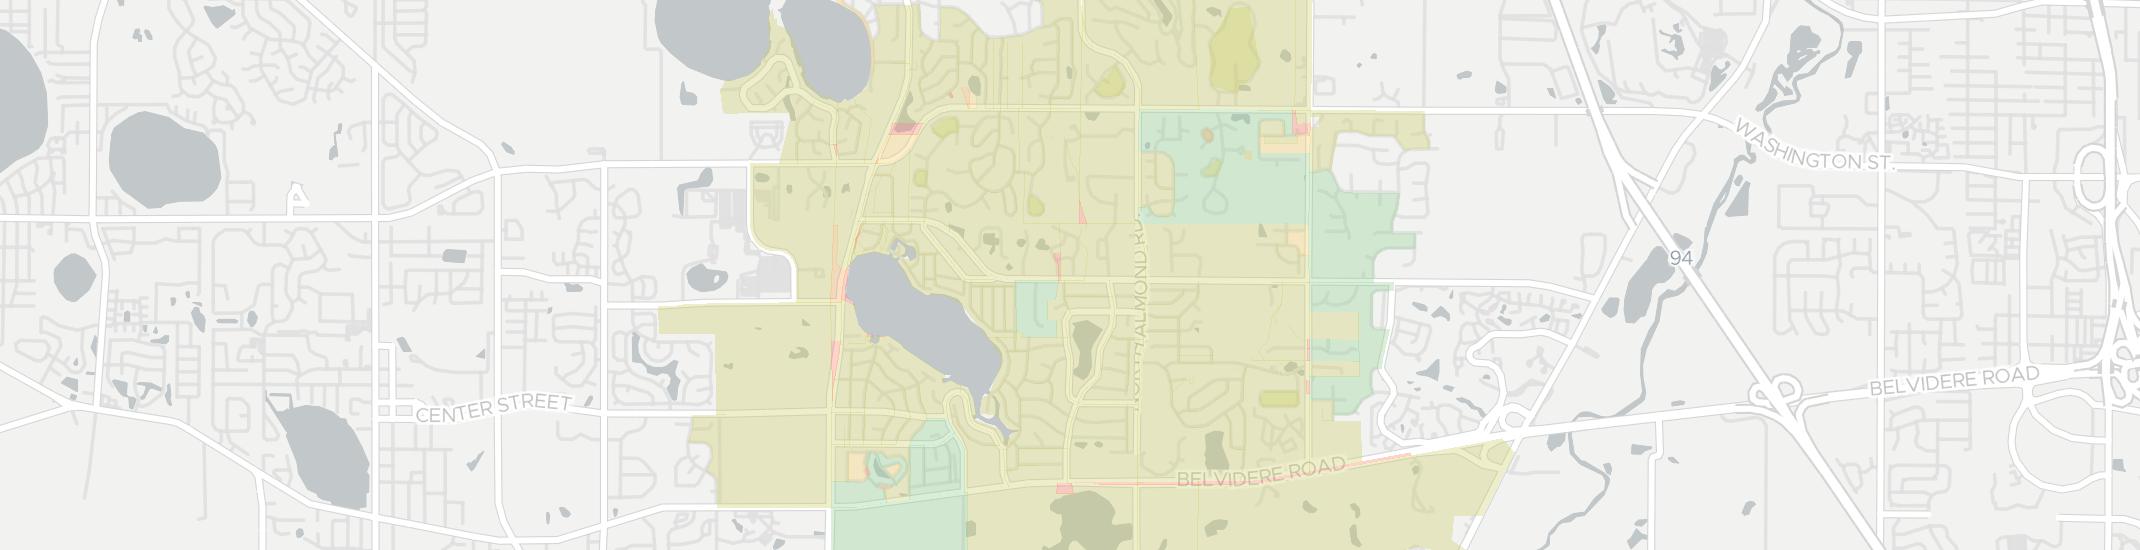 Gages Lake Internet Competition Map. Click for interactive map